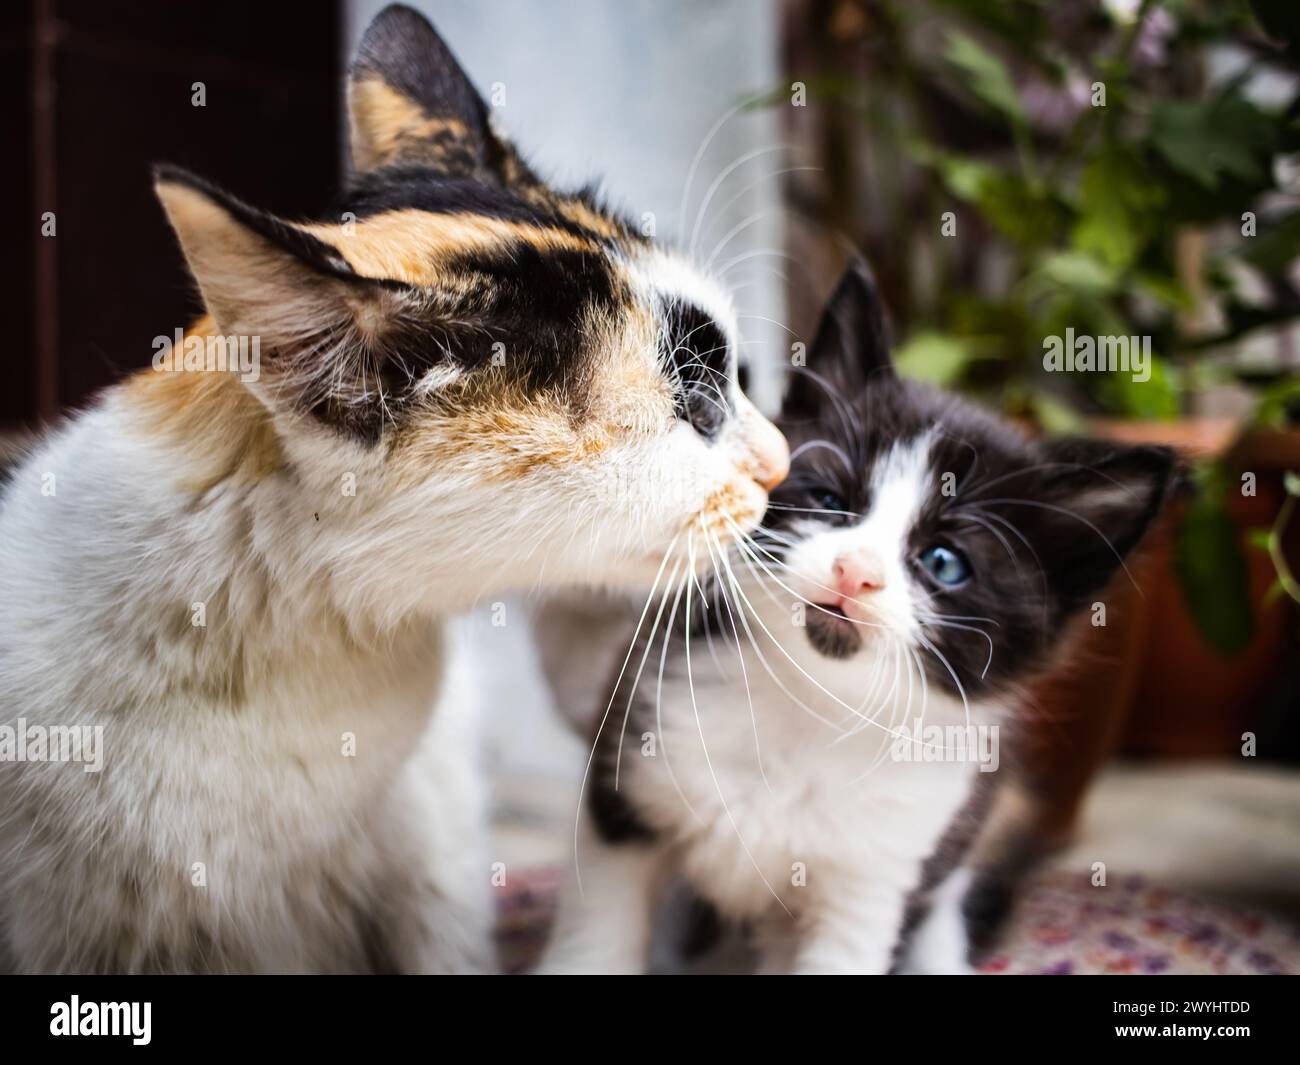 mother cat caressing its infant baby kitten. the motherly love and affection between two felines is symbolized. Stock Photo